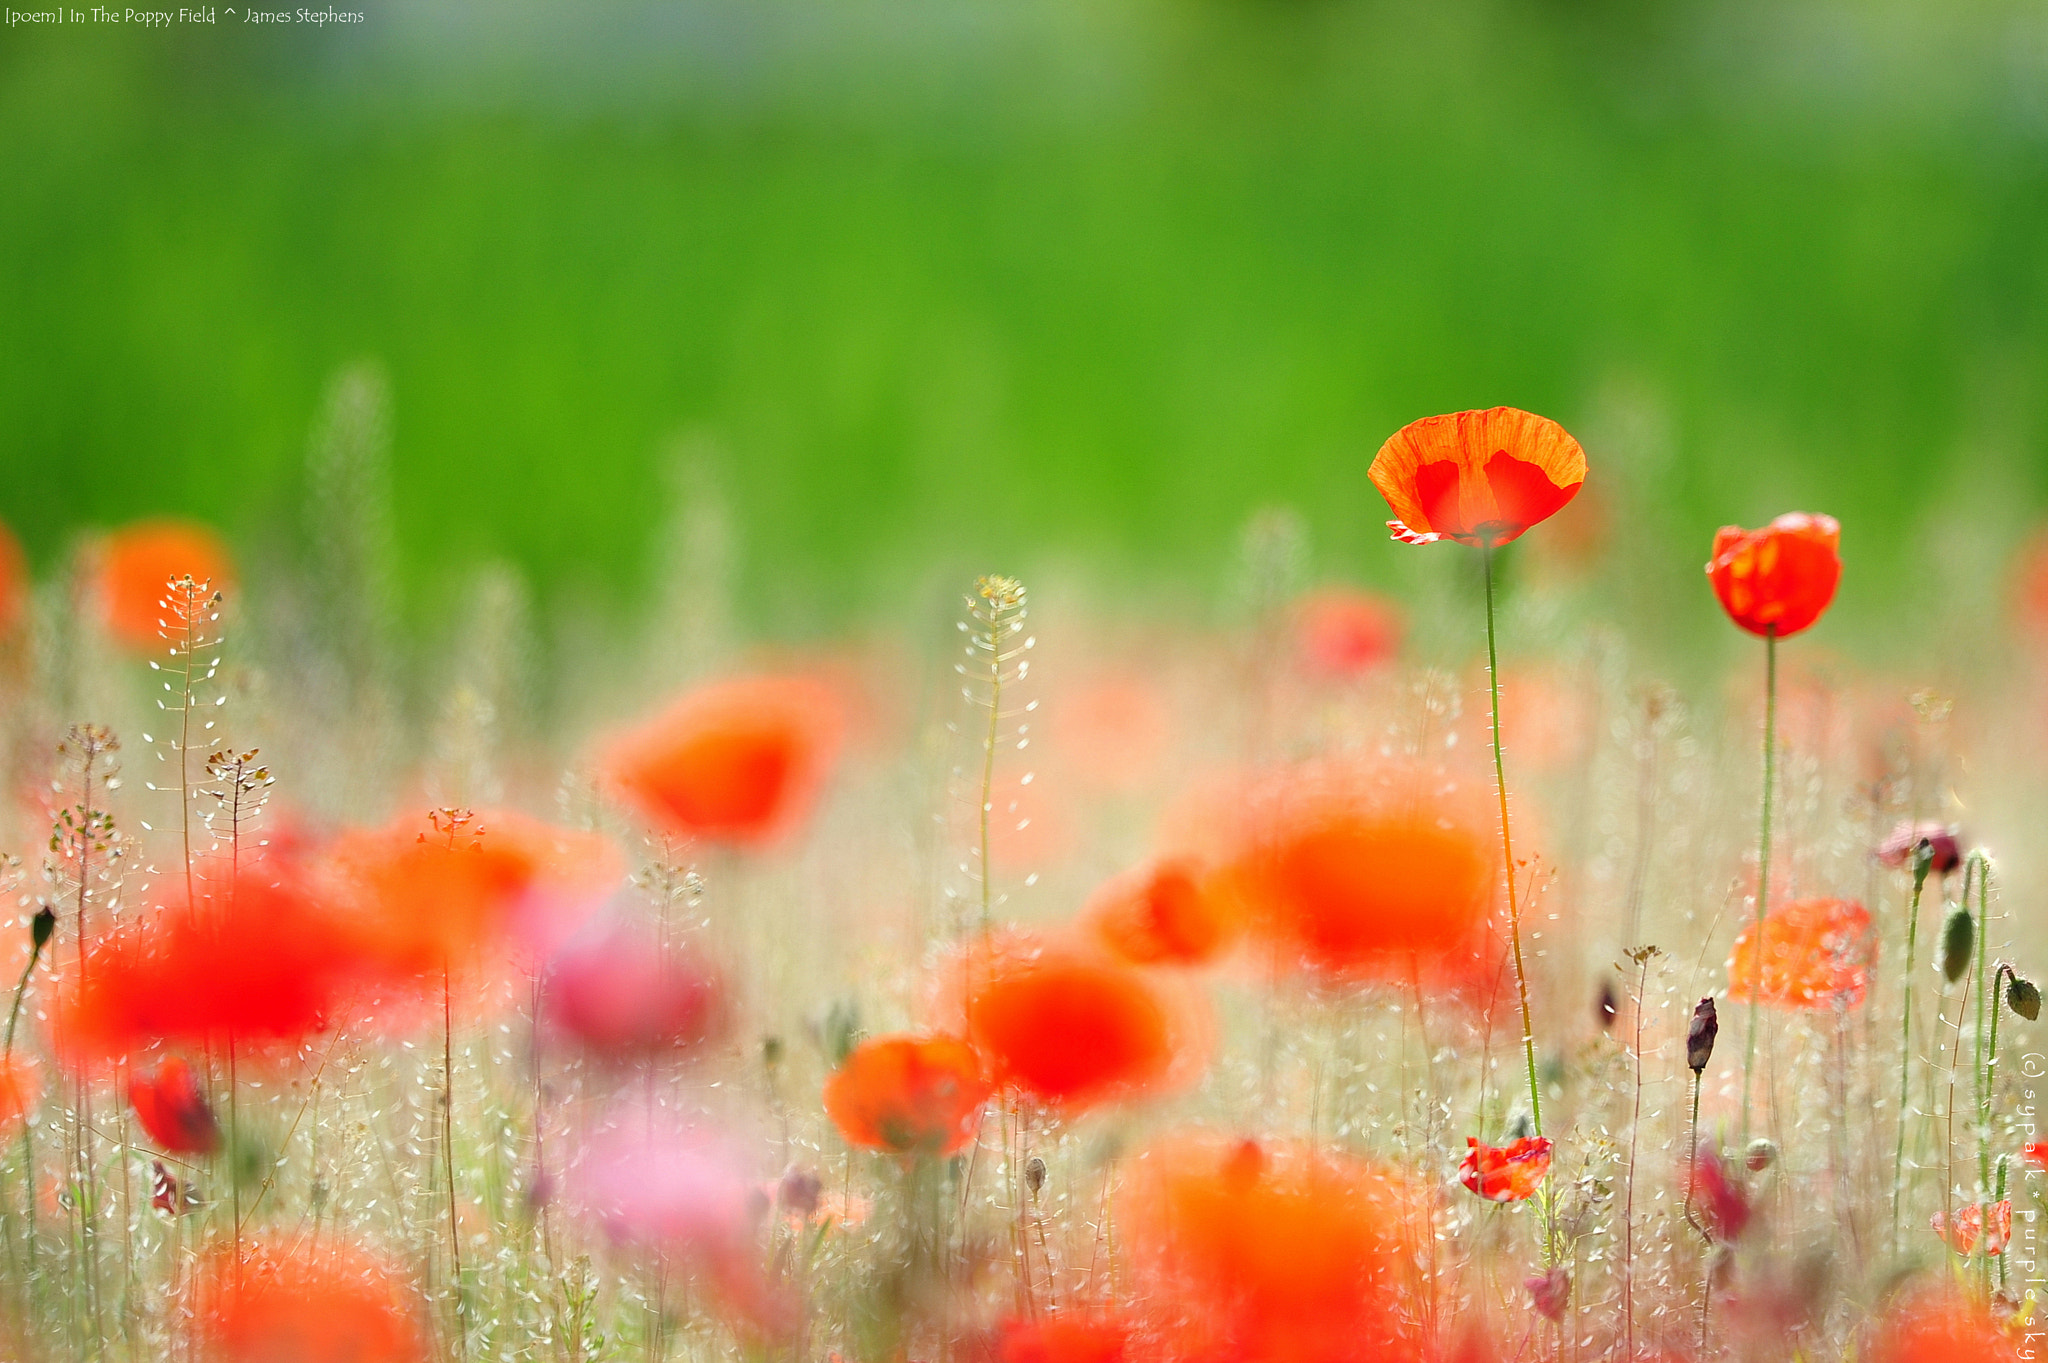 Nikon Nikkor AF-S 300mm F4E PF ED VR sample photo. In the poppy field ** photography